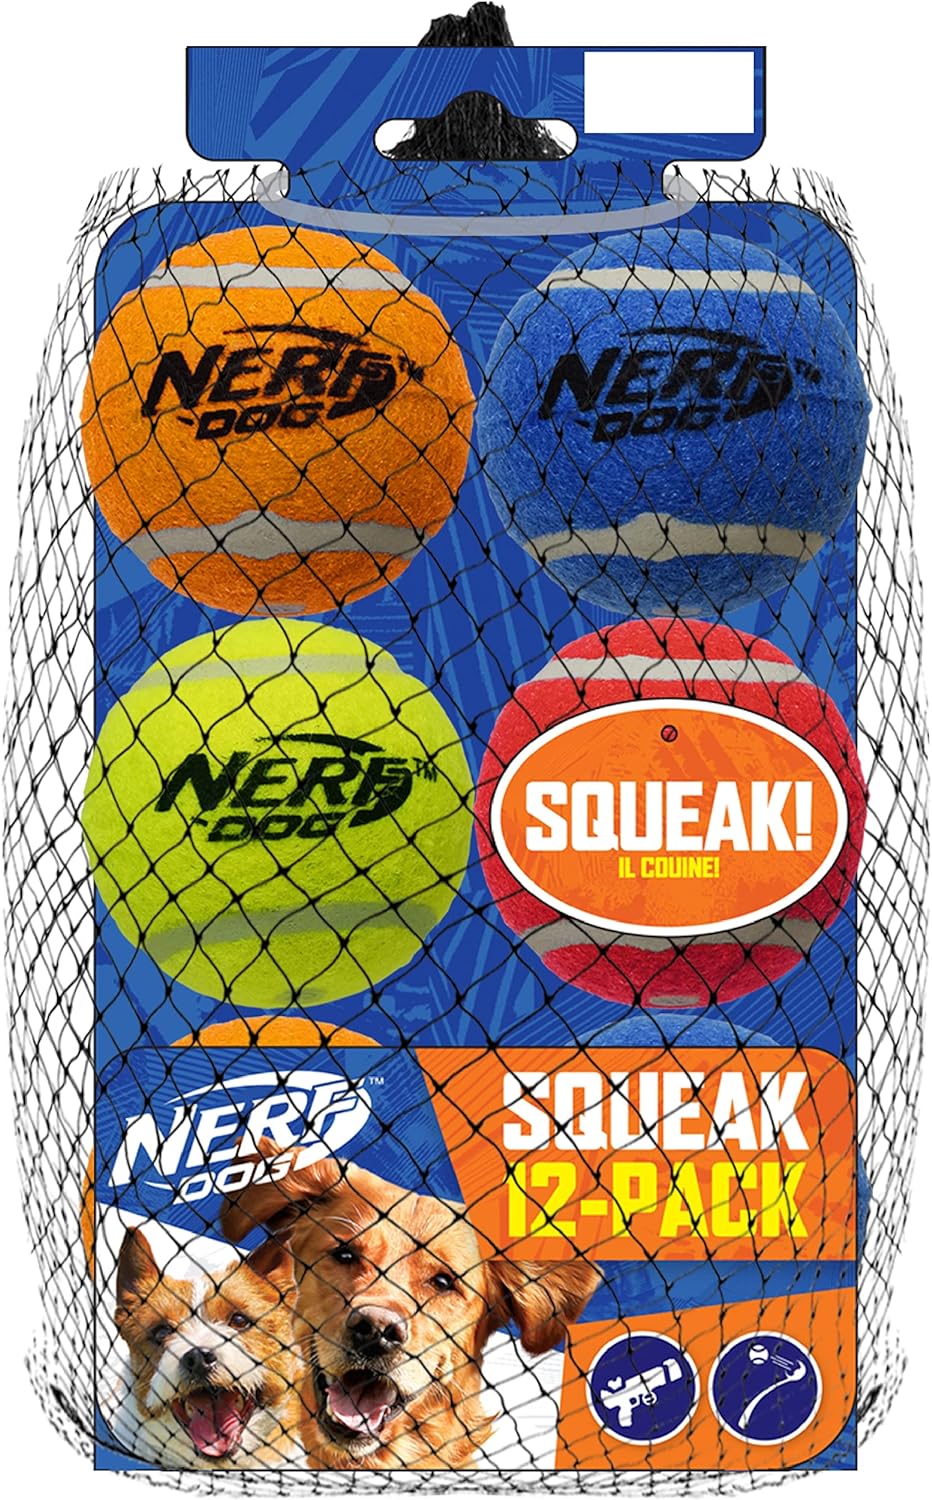 Nerf Dog 12-Piece Dog Toy Gift Set, Includes 2.5in Squeak Tennis Ball 12-Pack, Nerf Tough Material, Multicolored